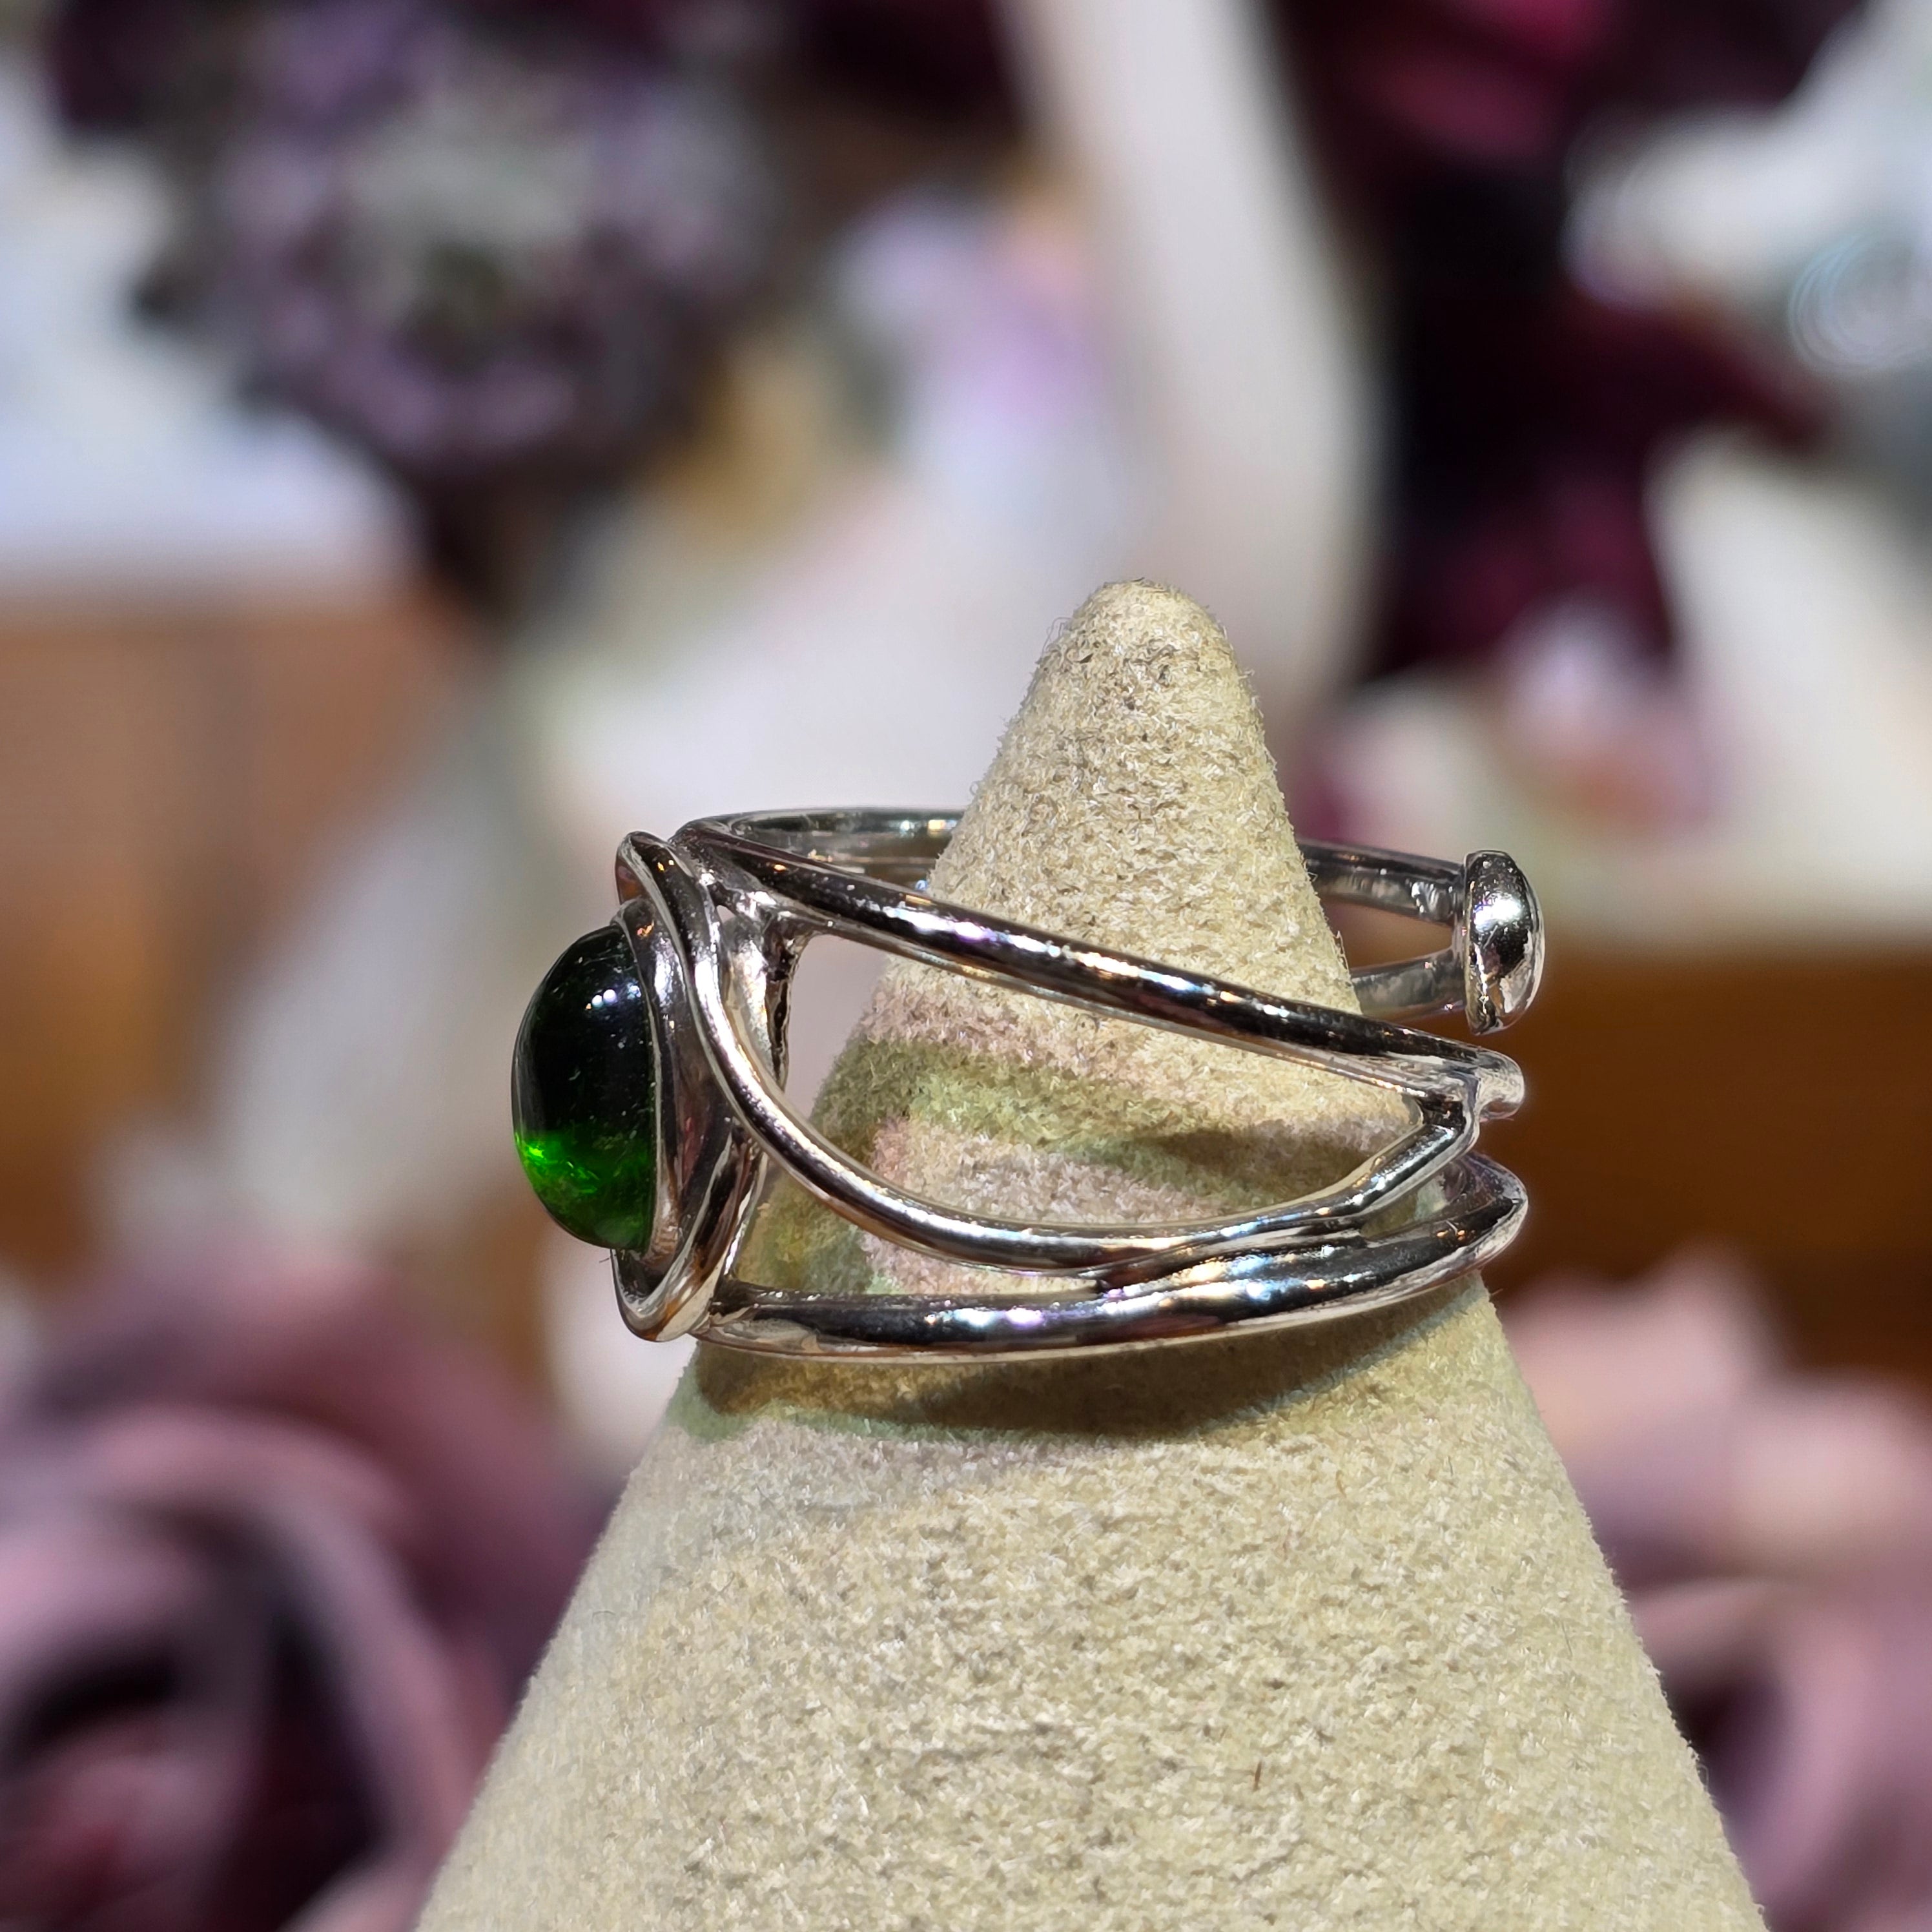 Chrome Diopside Midi Adjustable Finger Cuff Ring .925 Silver for Heart Healing, Compassion and Forgiveness